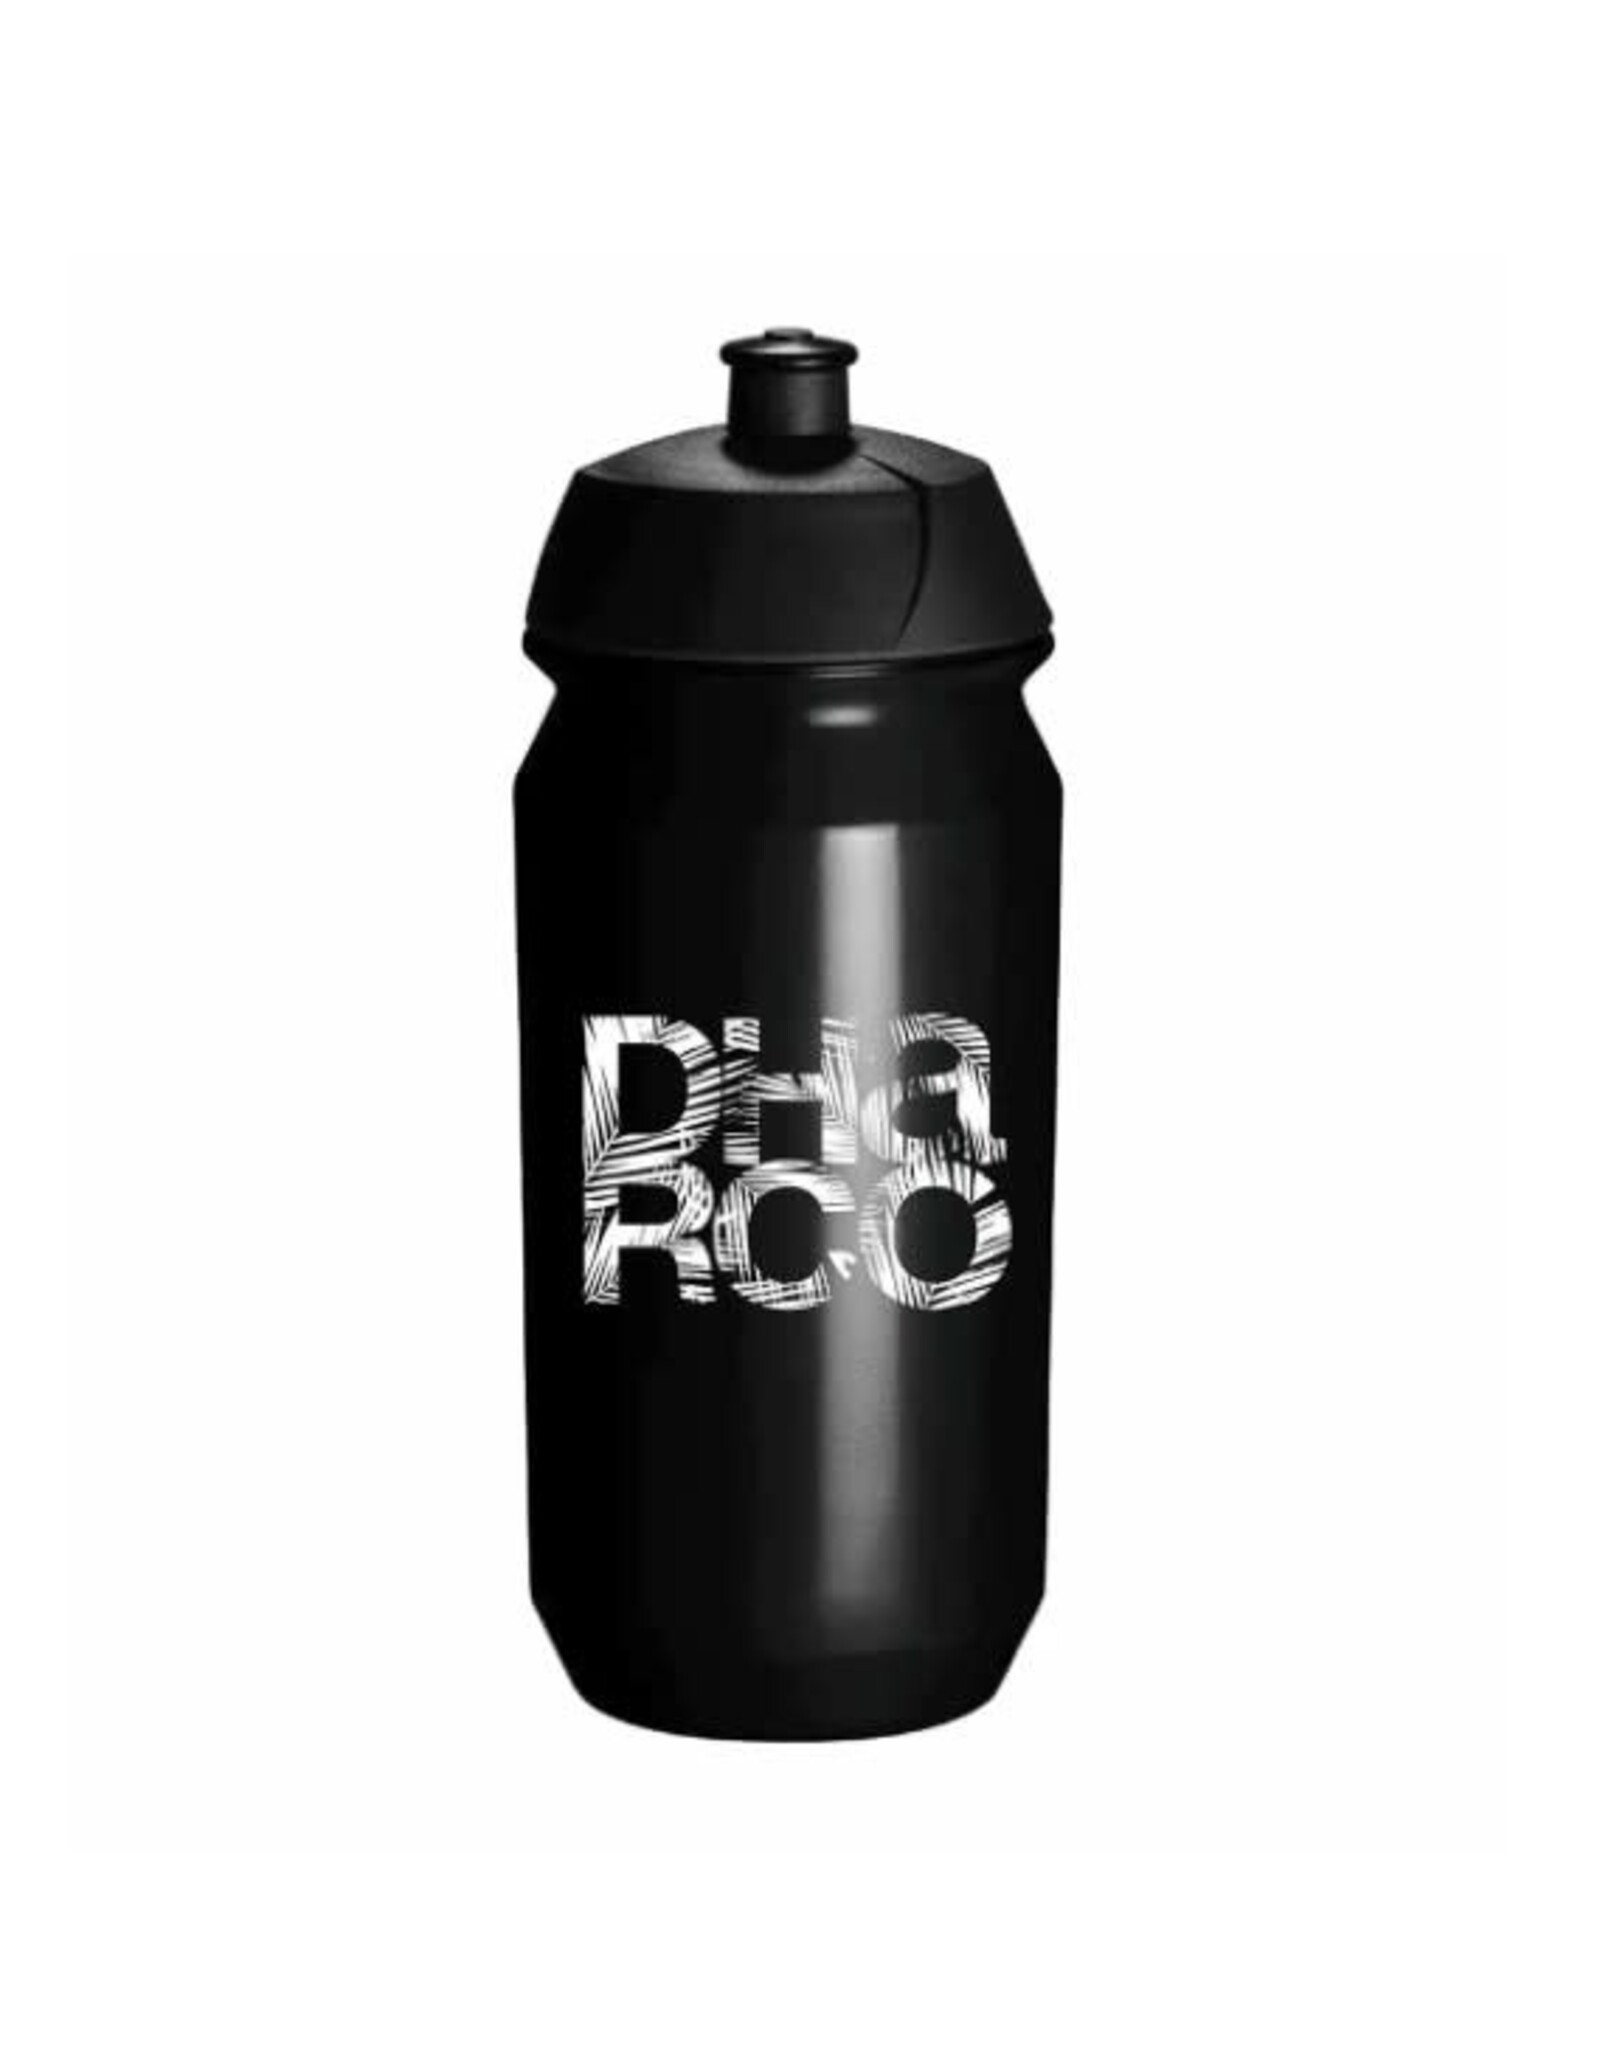 Dharco Bottle DHarco biodegradable